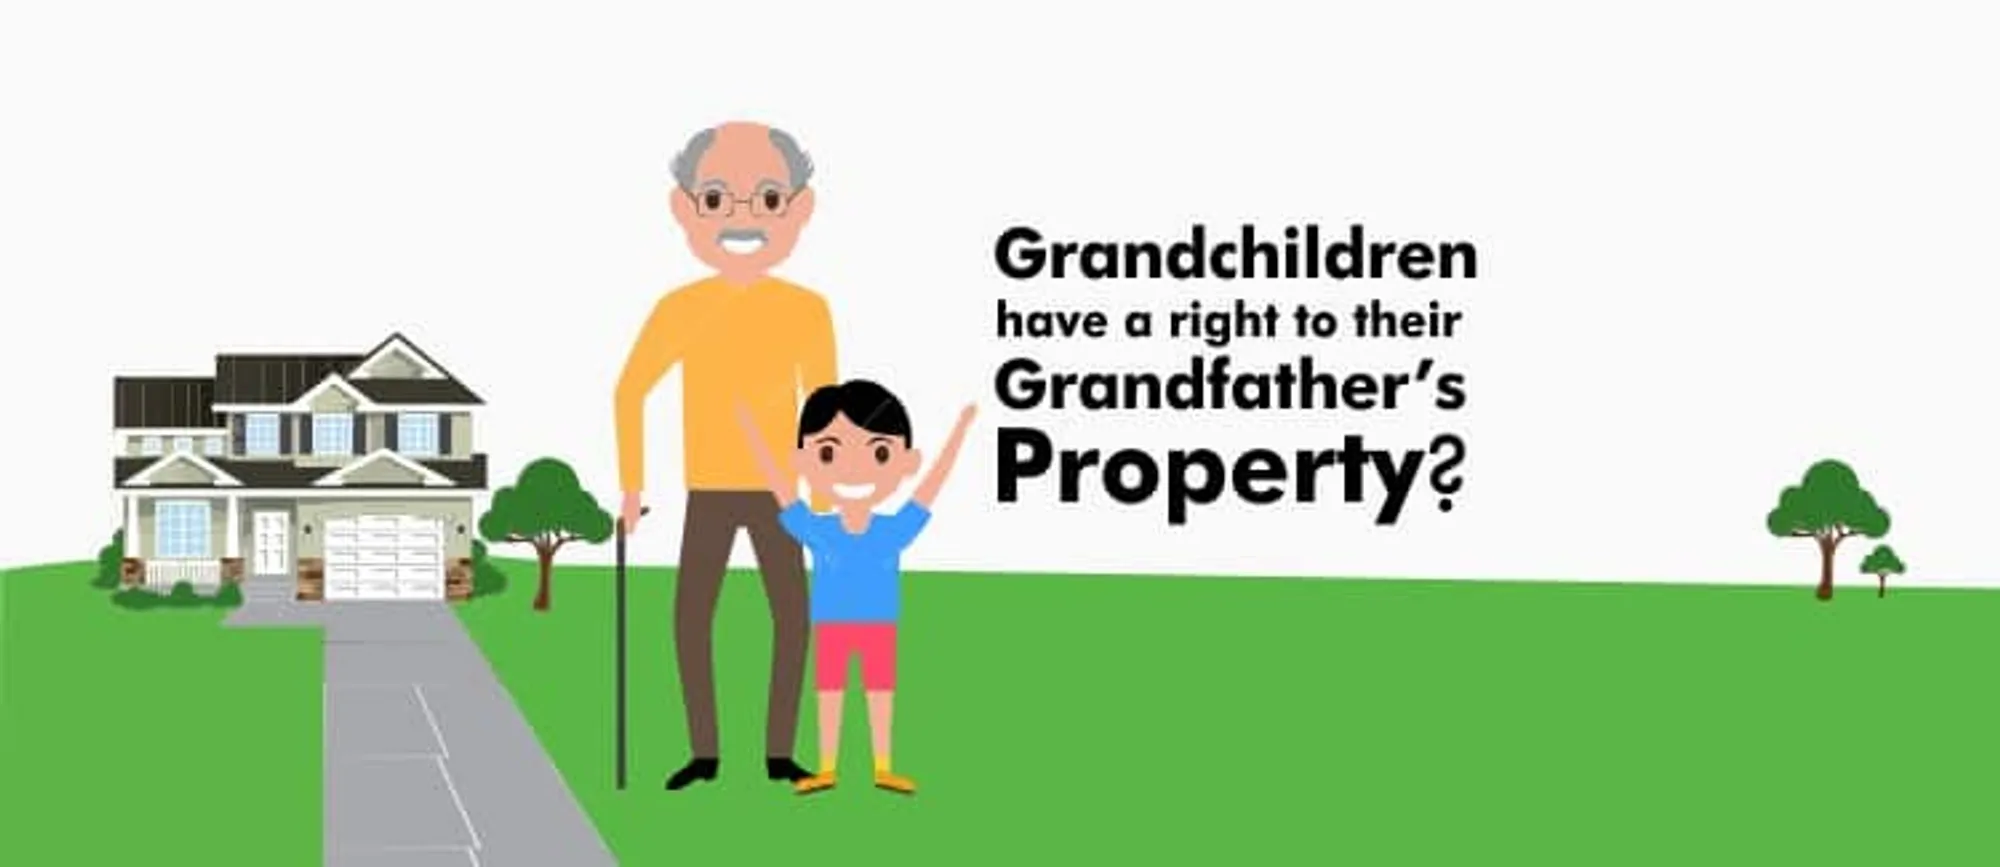 Do grandchildren have a right to their grandfather’s property